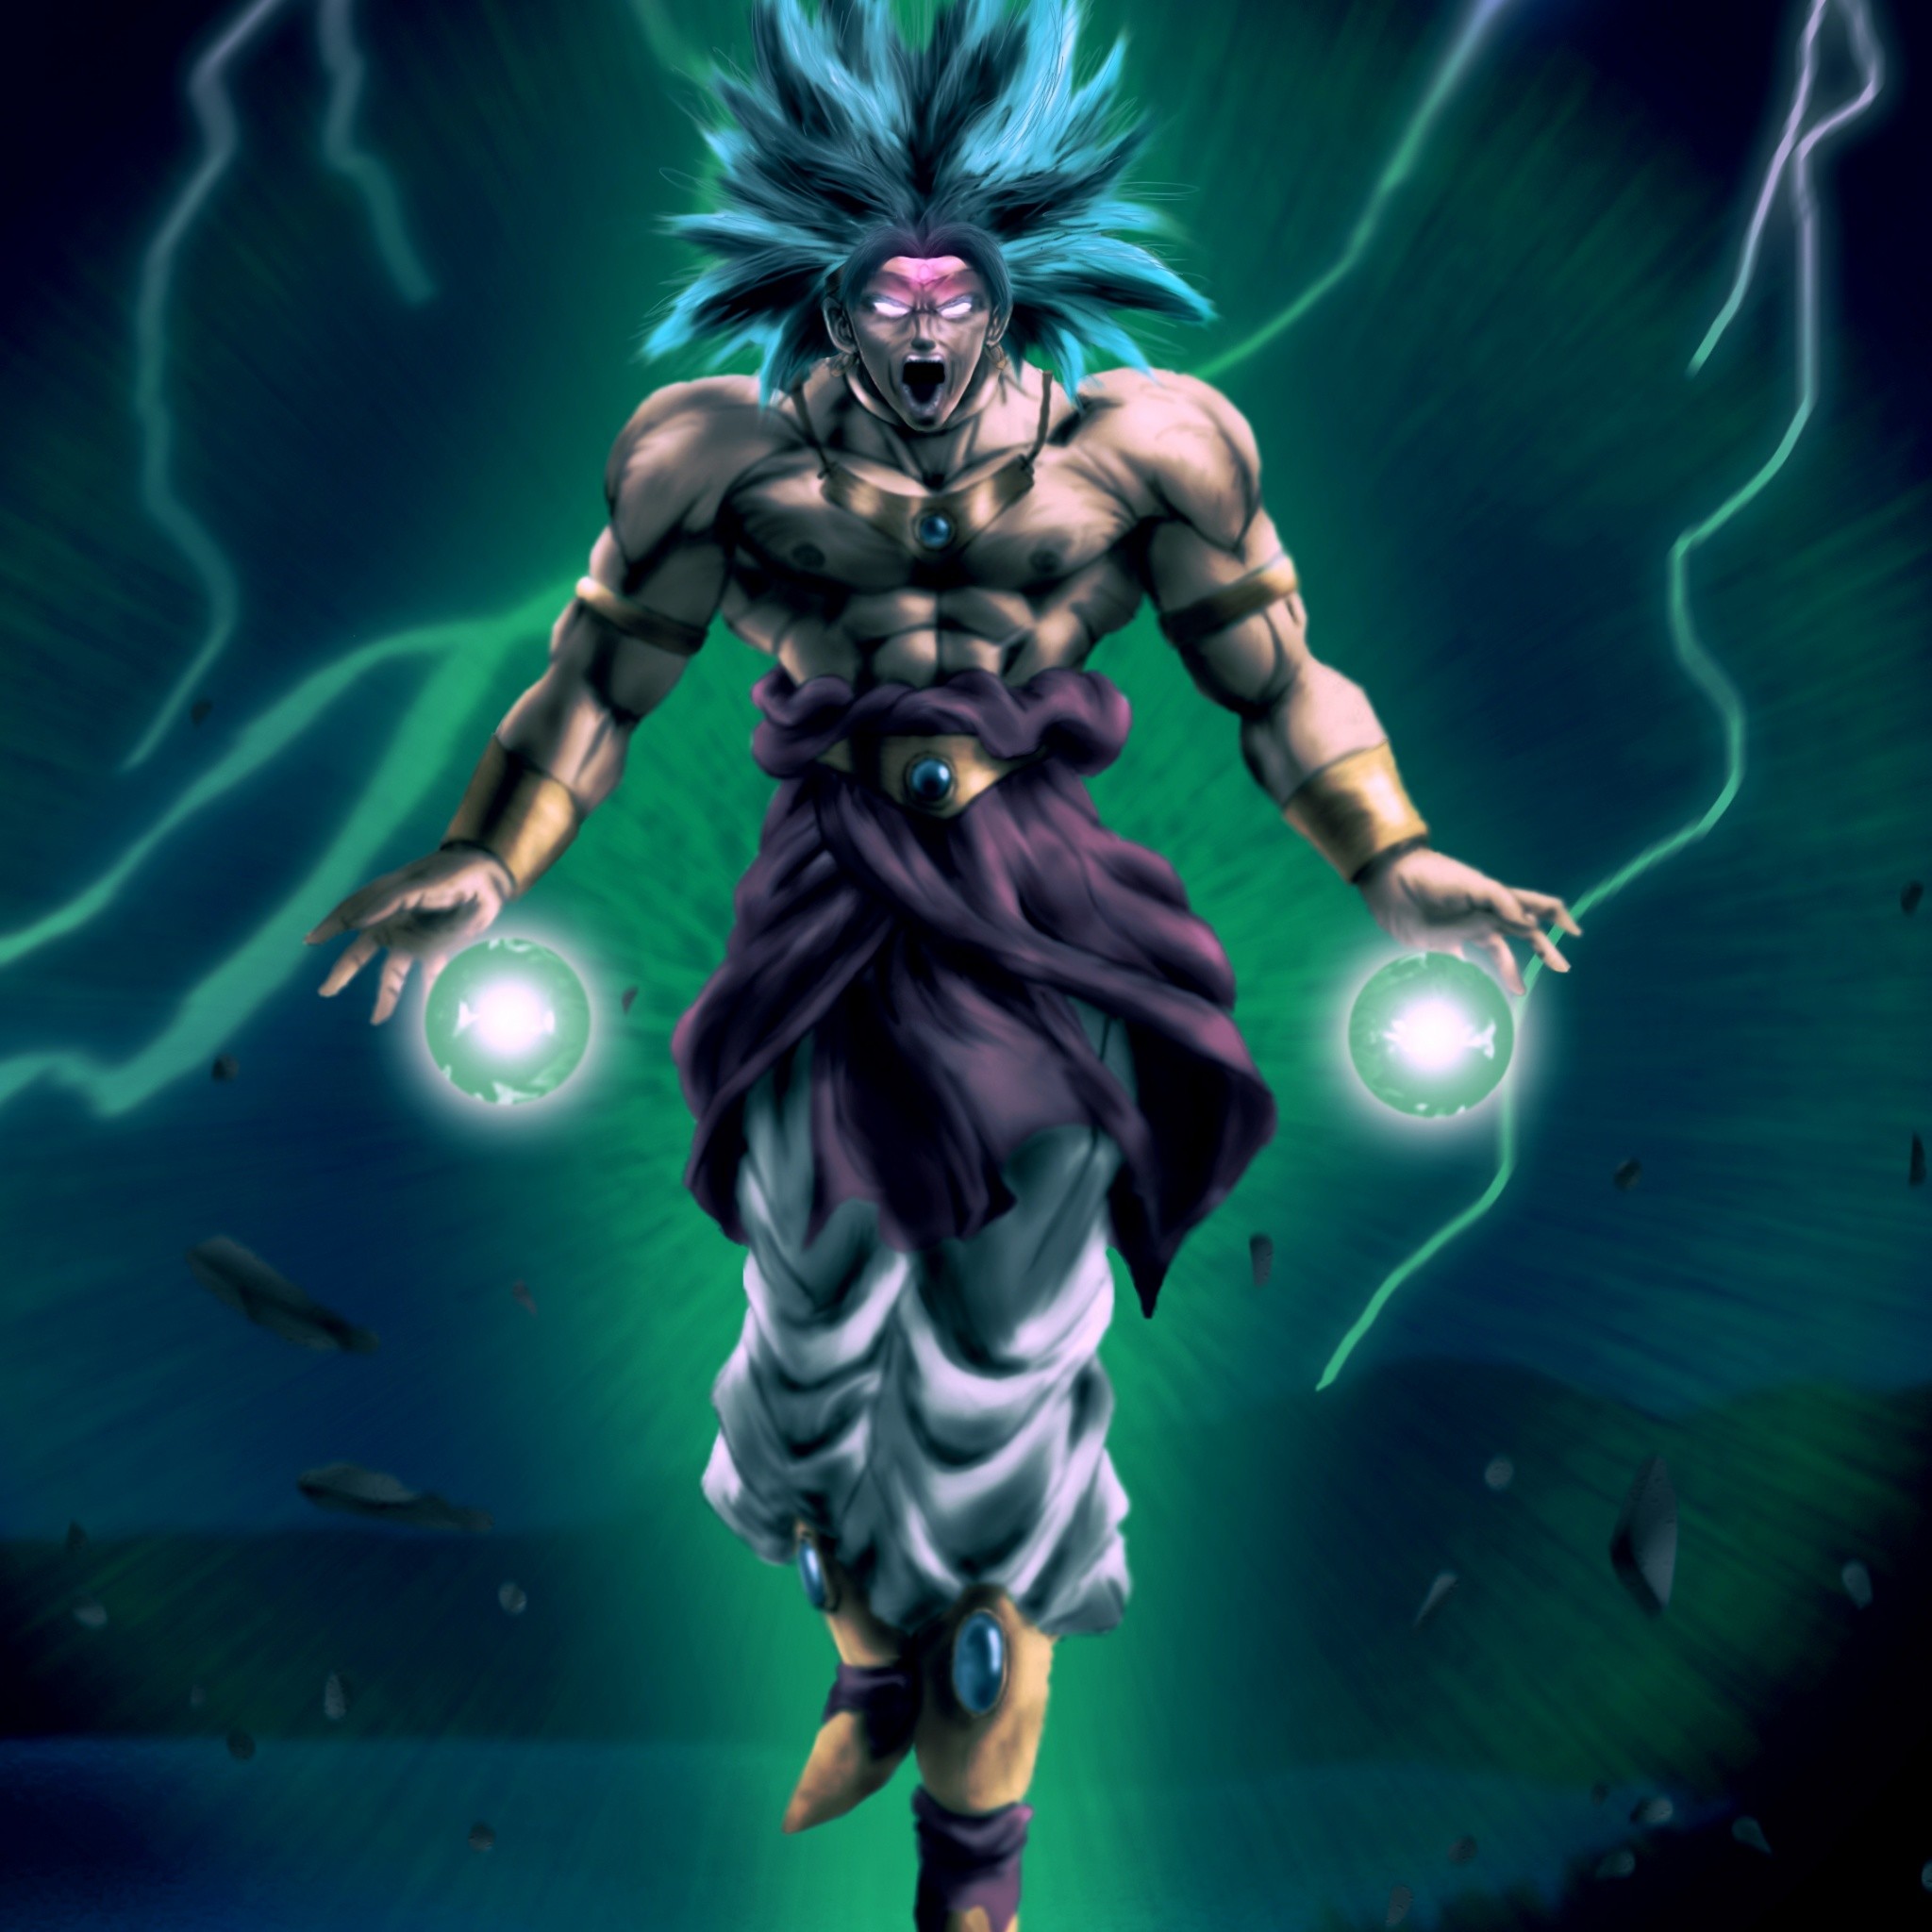 Legendary Super Saiyan – Tap to see more awesomely cool Dragon Ball Z wallpaper